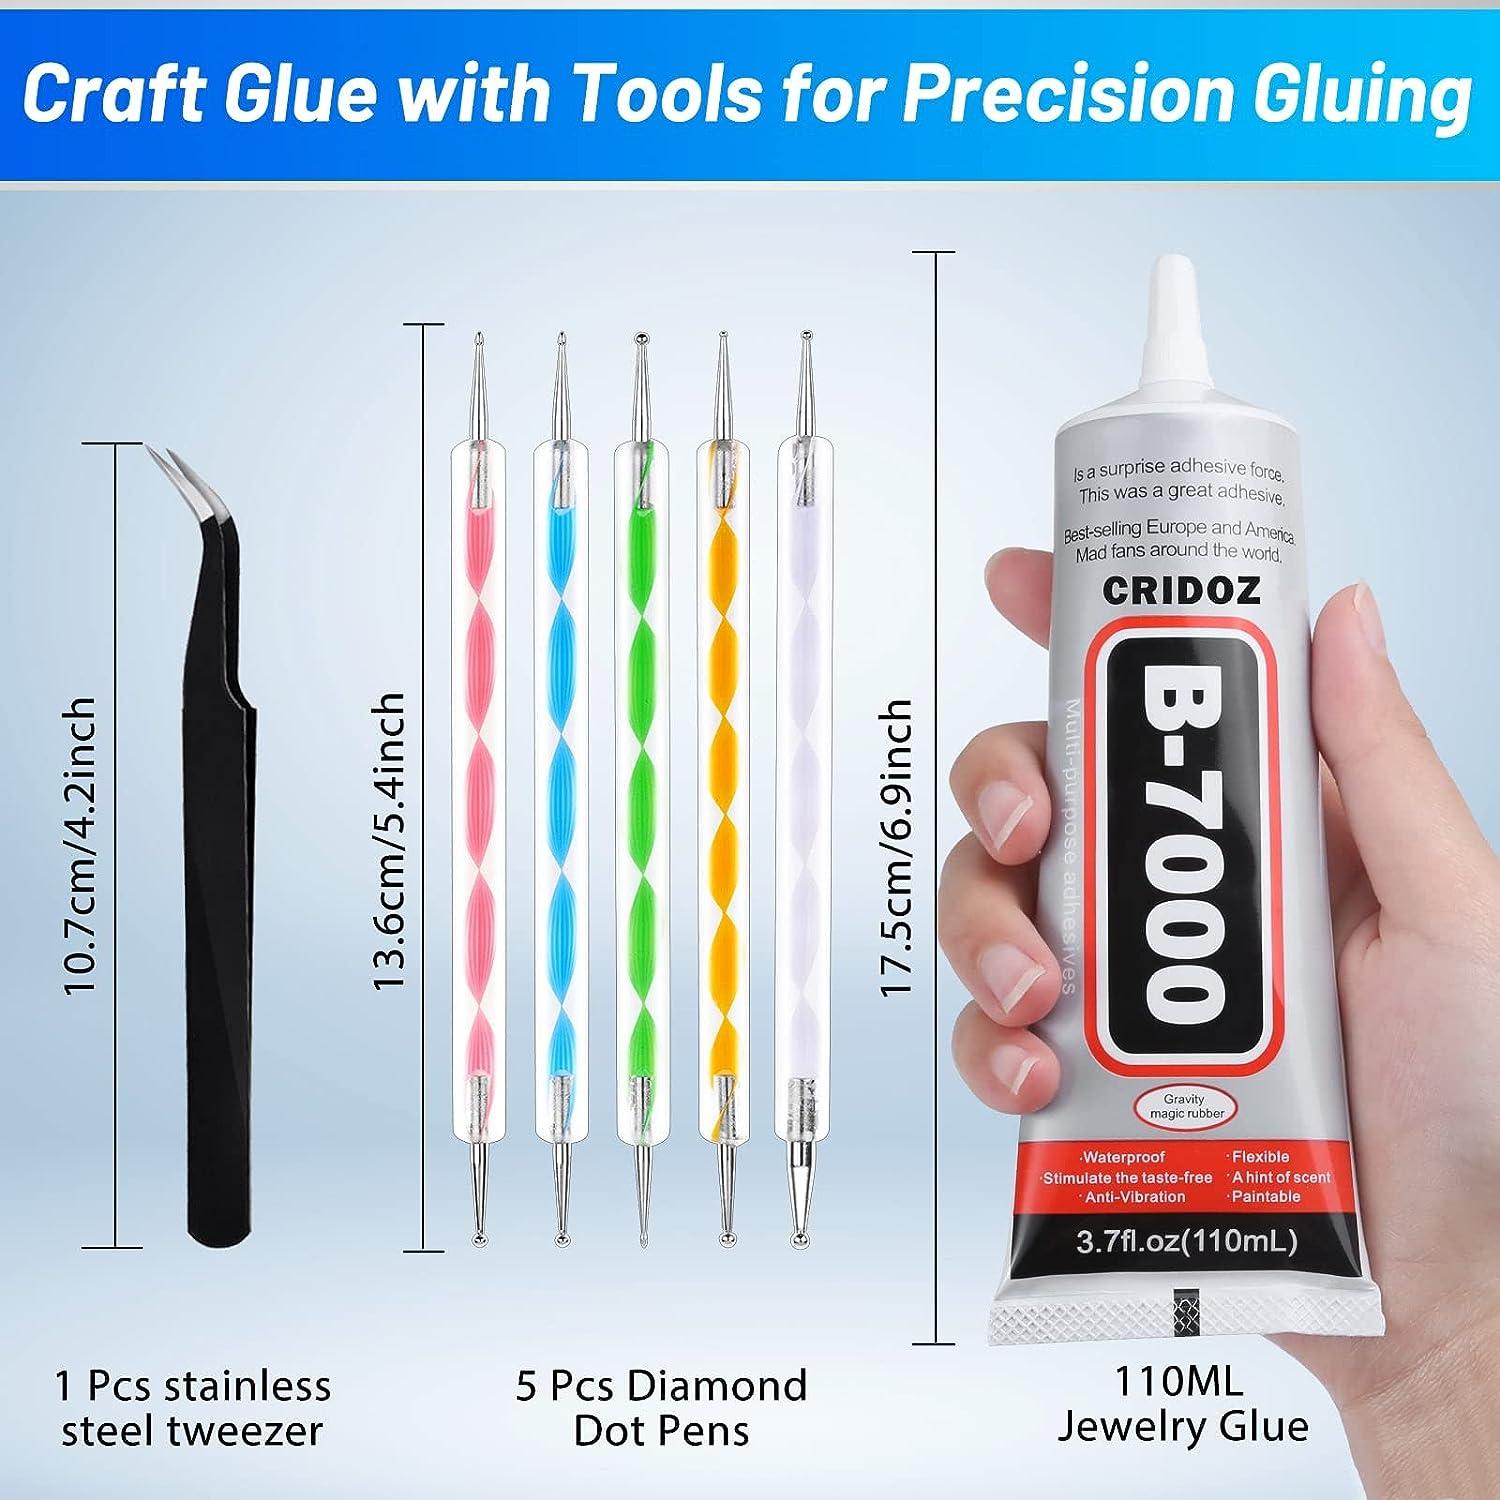 B7000 Jewelry Glue for Rhinestones, Clear Glue Adhesive with Precision Tips  Crafts Glue for Fabric with Dotting Stylus and Tweezers for Fabric,  Glasses, Metal and Stone, 0.9 fl oz, 2 Packs 